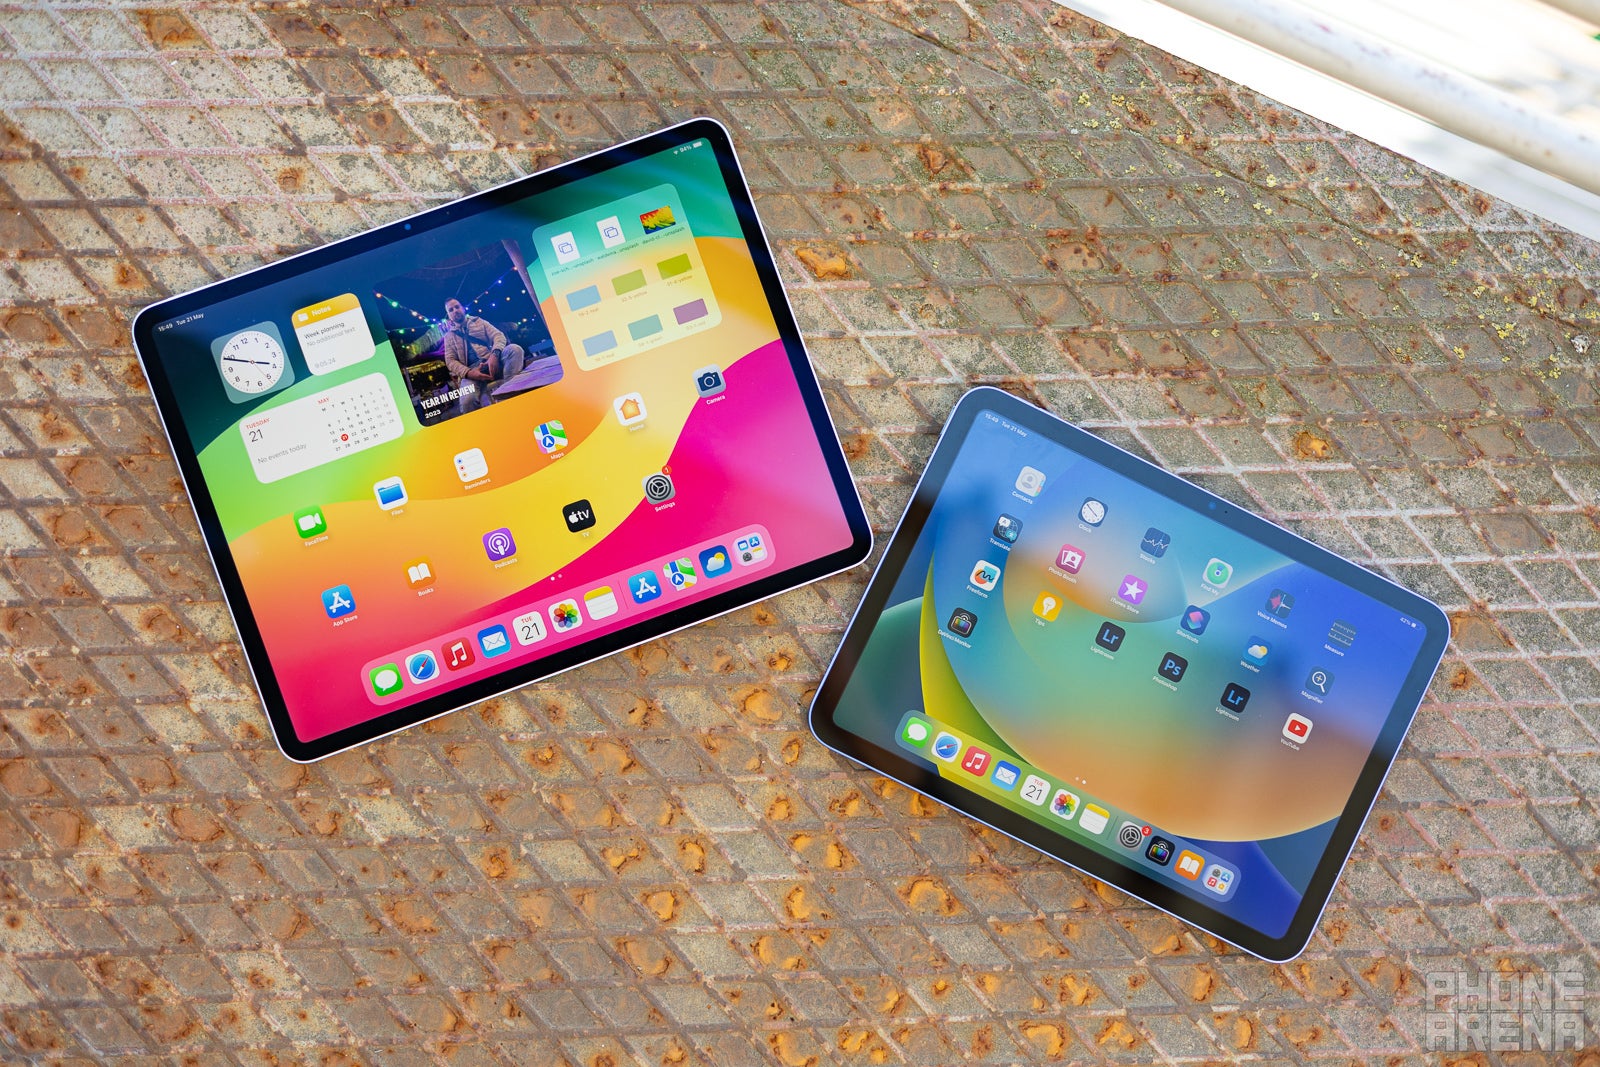 The Air screen sure is prettier (Image credit - PhoneArena) - iPad Air M2 vs iPad 10th gen: core differences